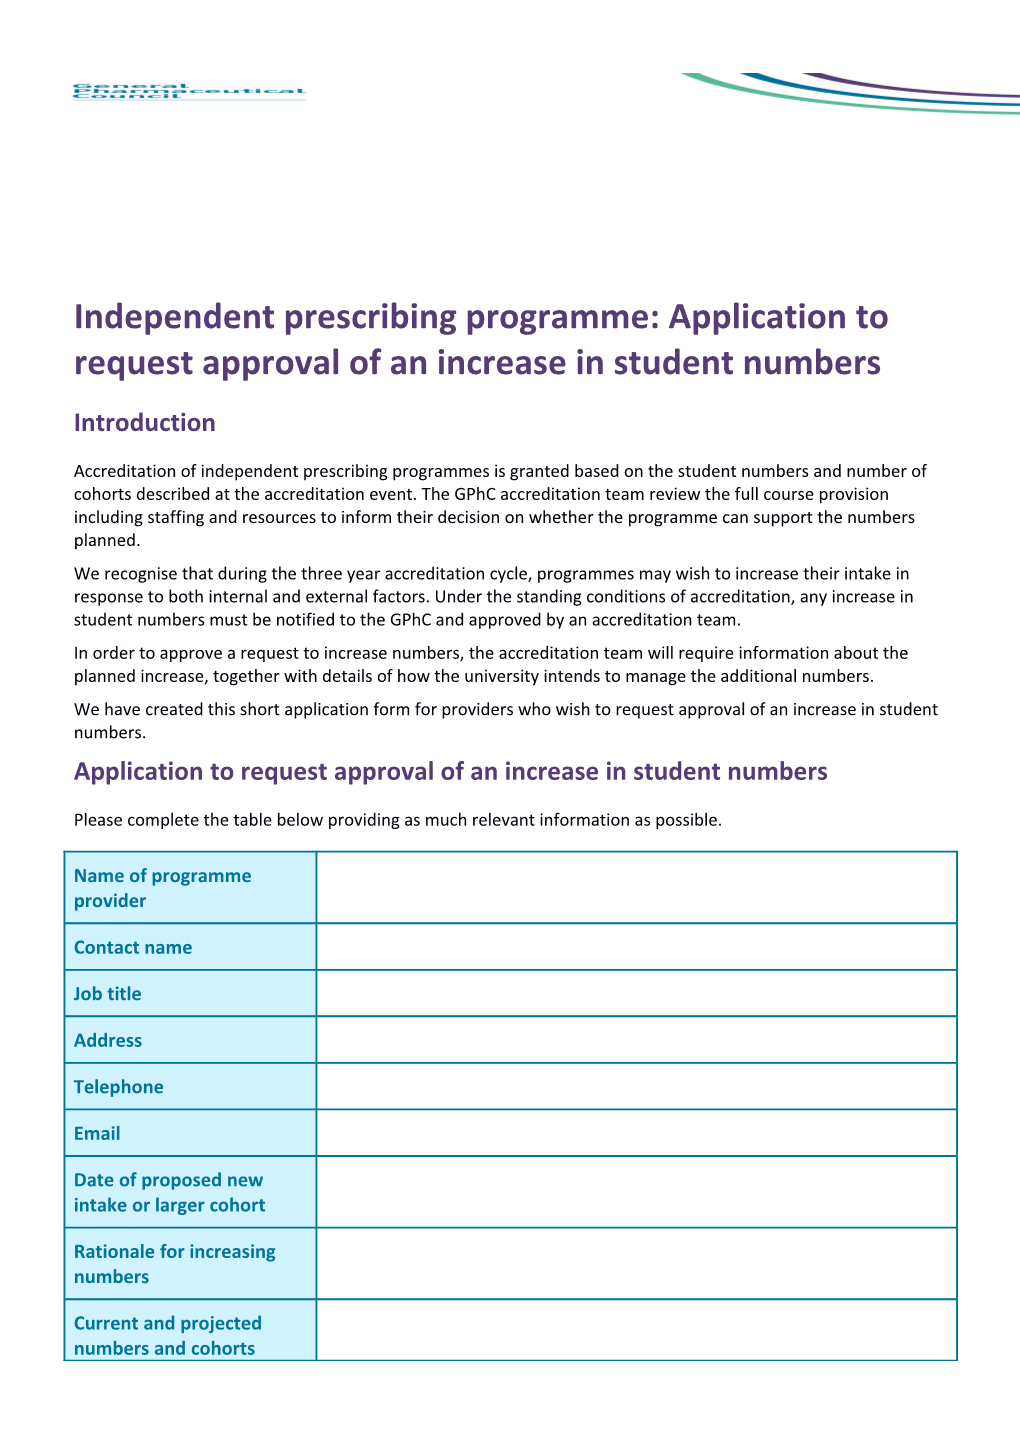 Independent Prescribing Programme: Application to Request Approval of an Increase in Student